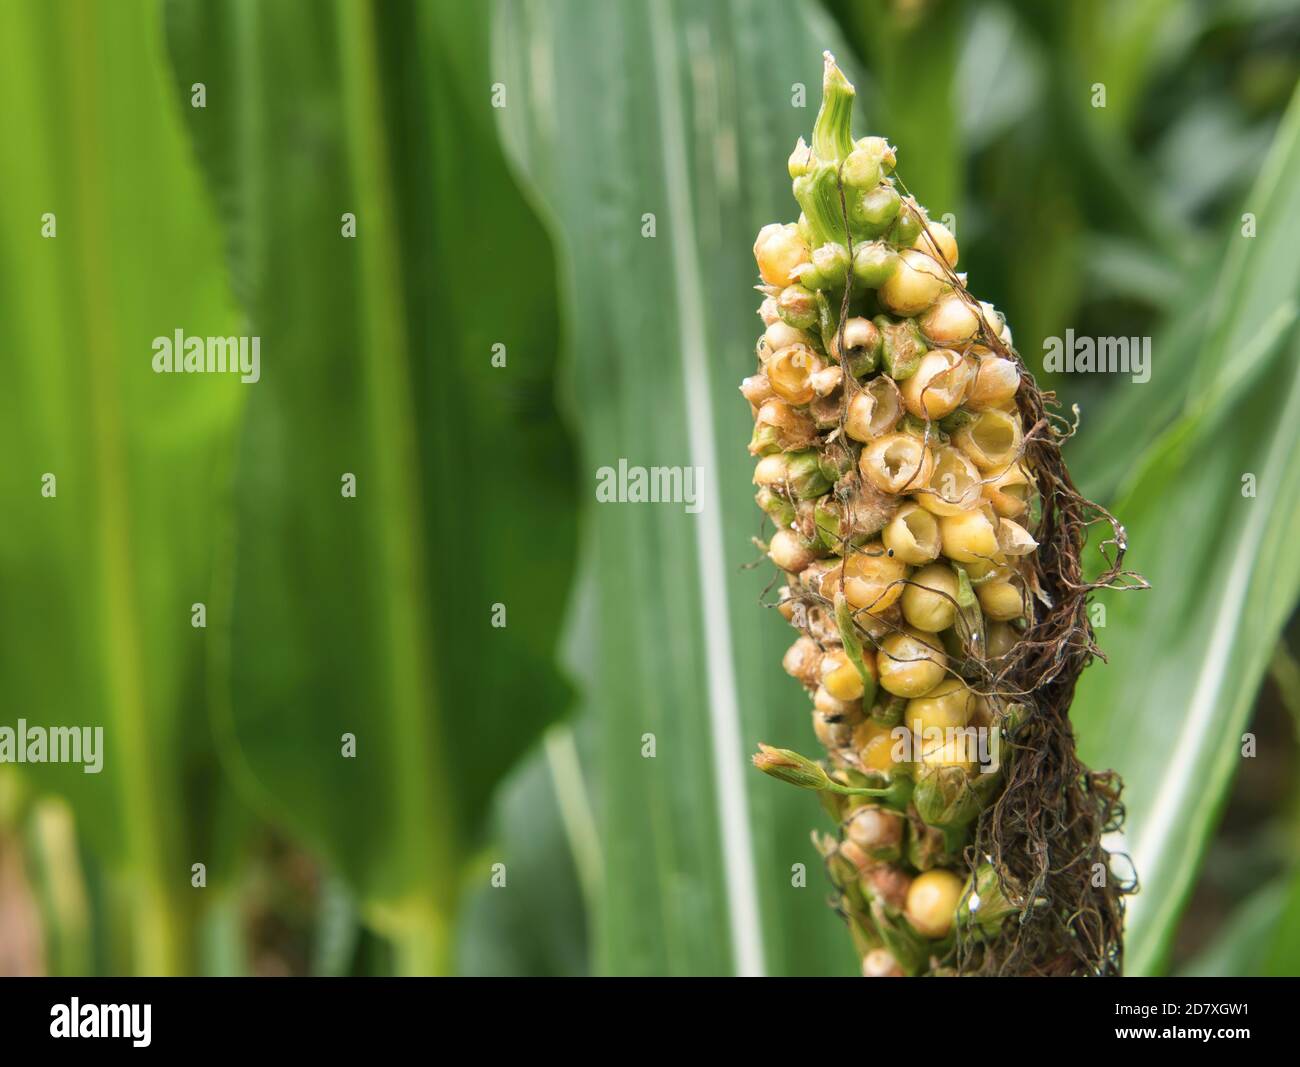 Corn on the cob in the corn field whose bracts were peeled by the birds and the corn kernels were hollowed out as a close-up view. A flower sprouts fr Stock Photo